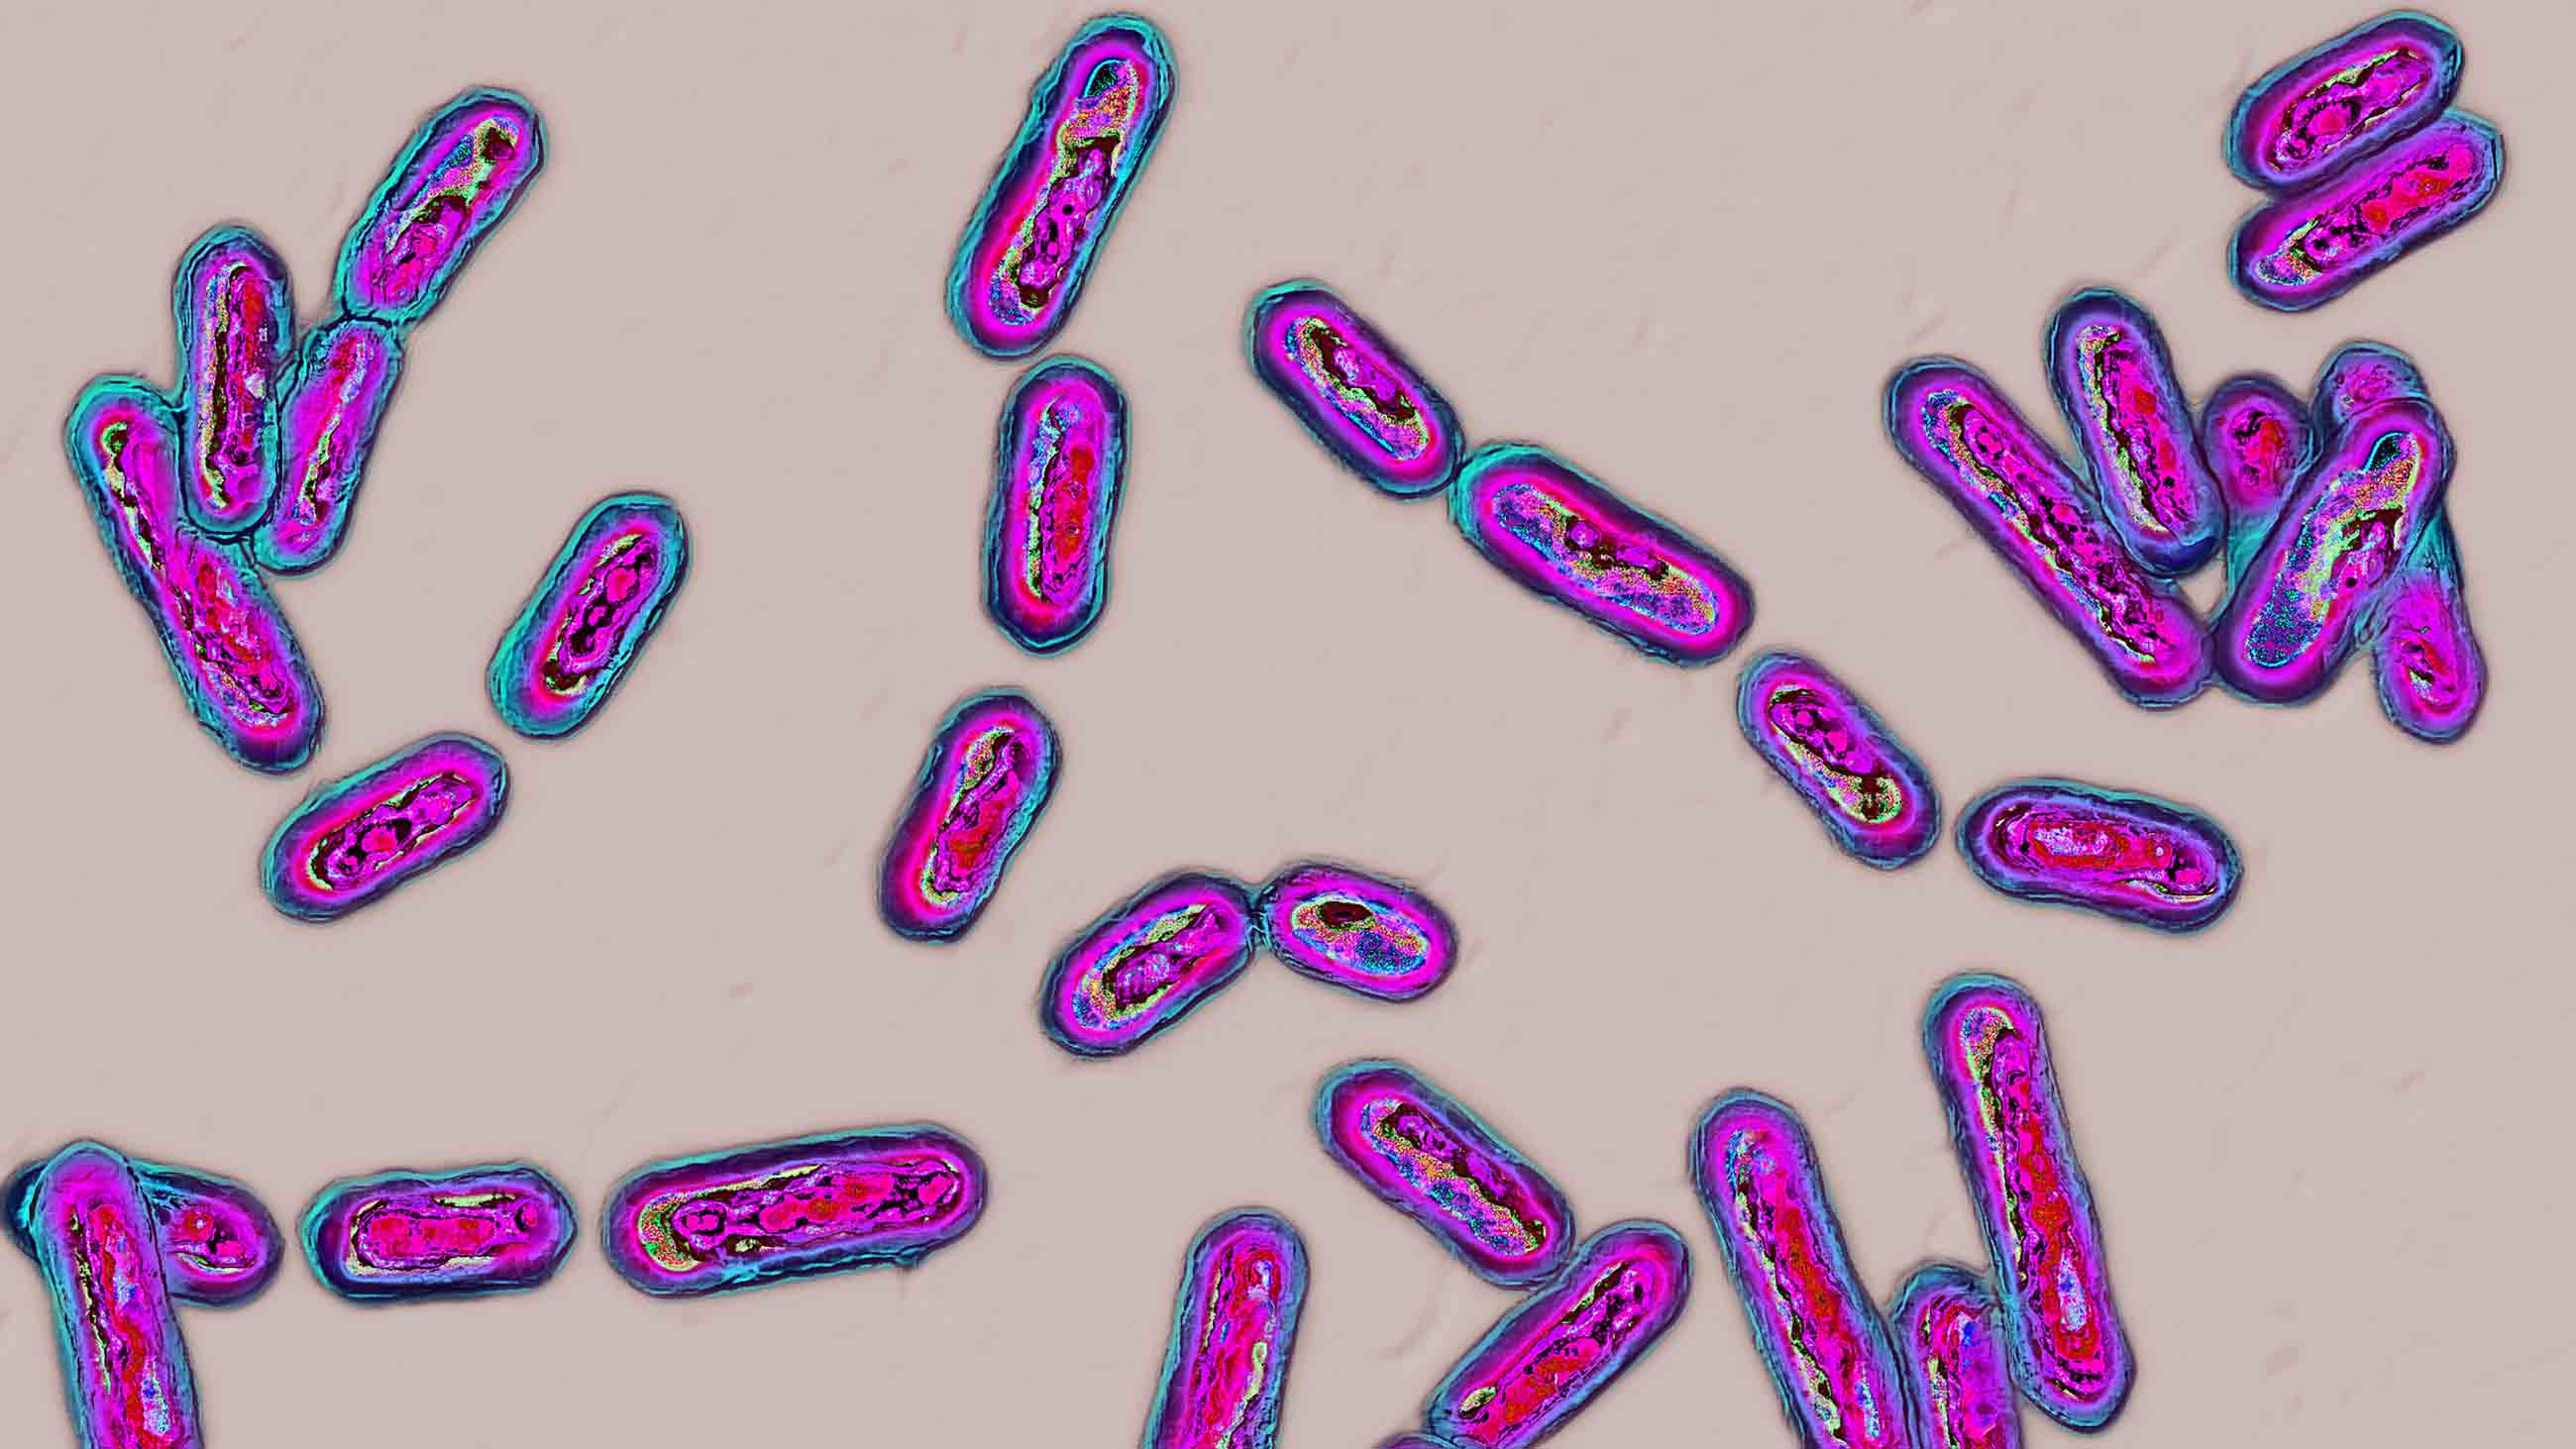 To treat stubborn gut bacterial infections caused by Clostridium difficile, some patients have performed their own fecal microbial transplants.